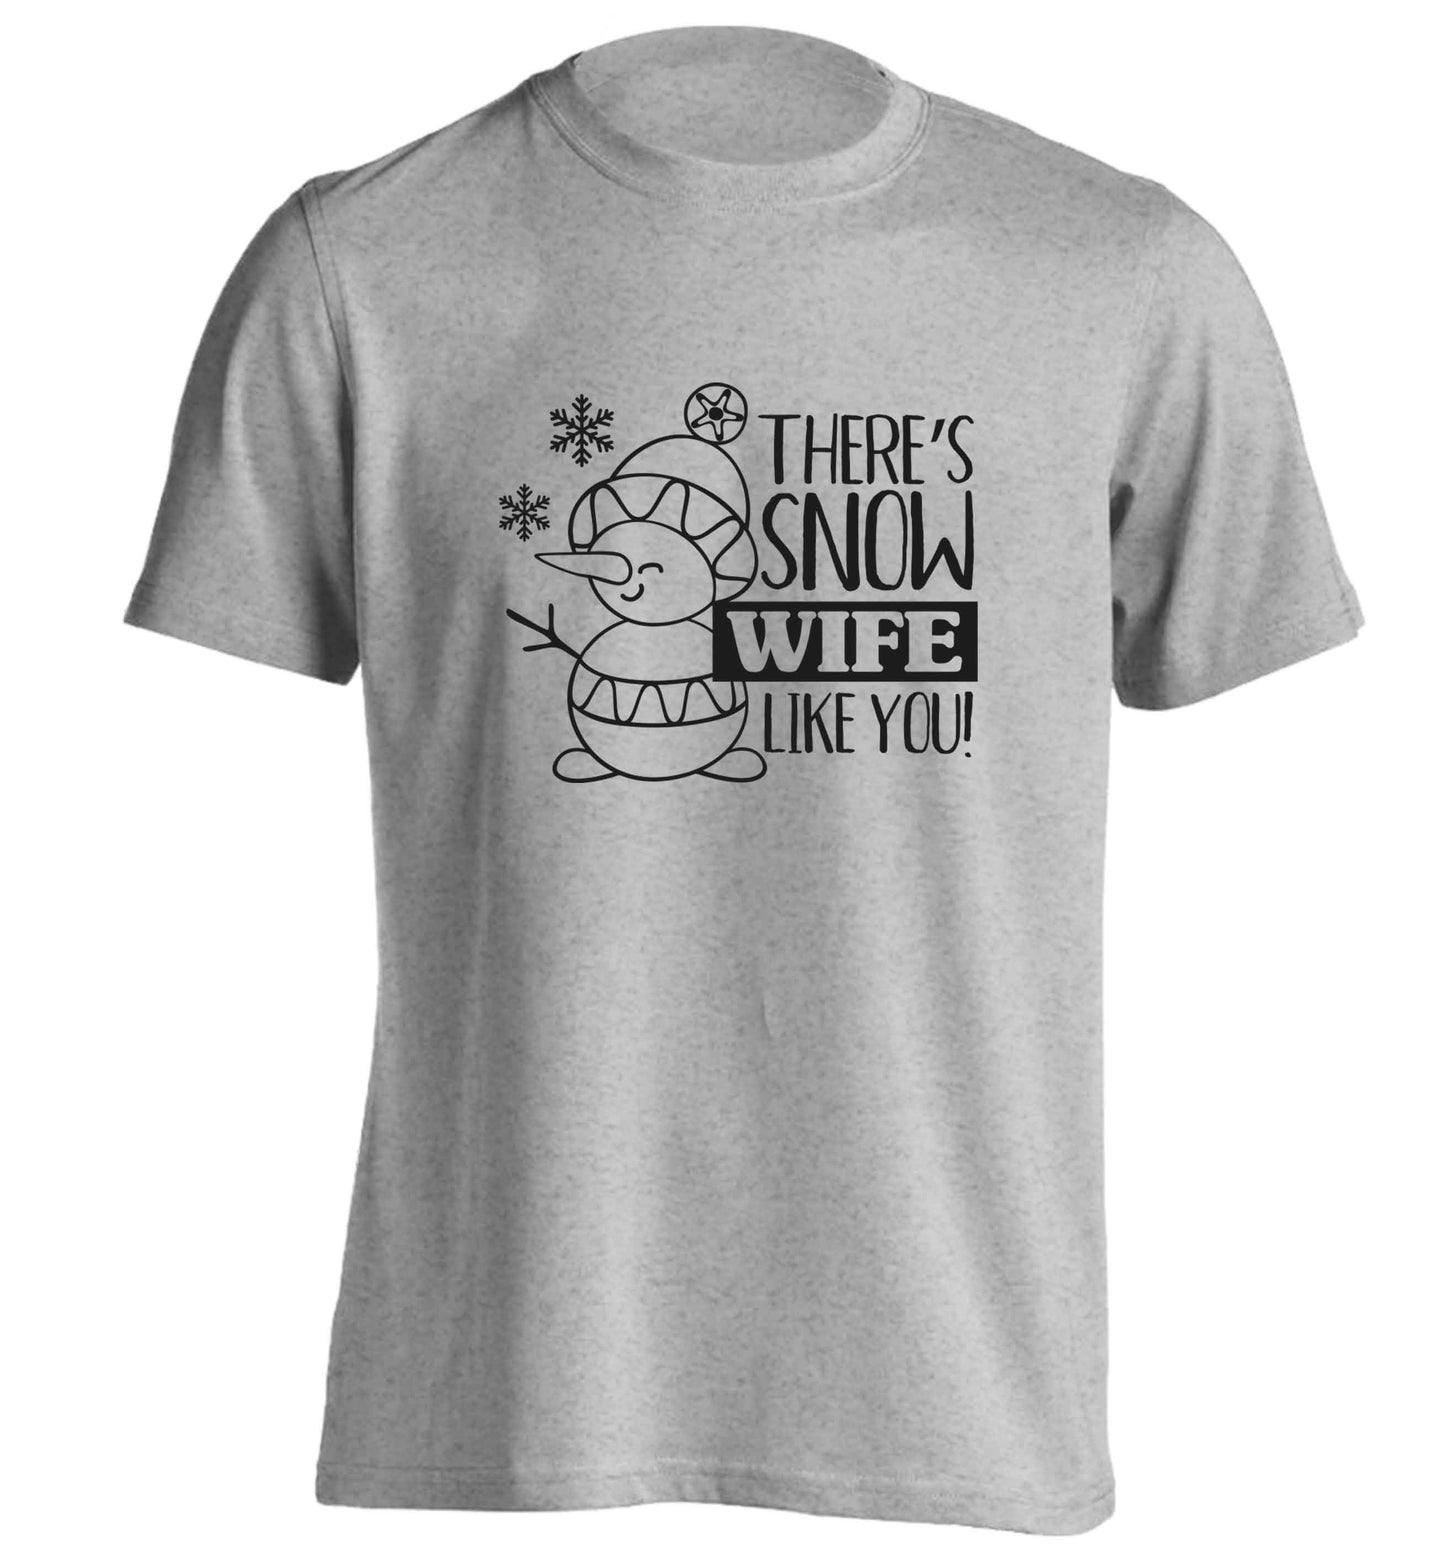 There's snow wife like you adults unisex grey Tshirt 2XL